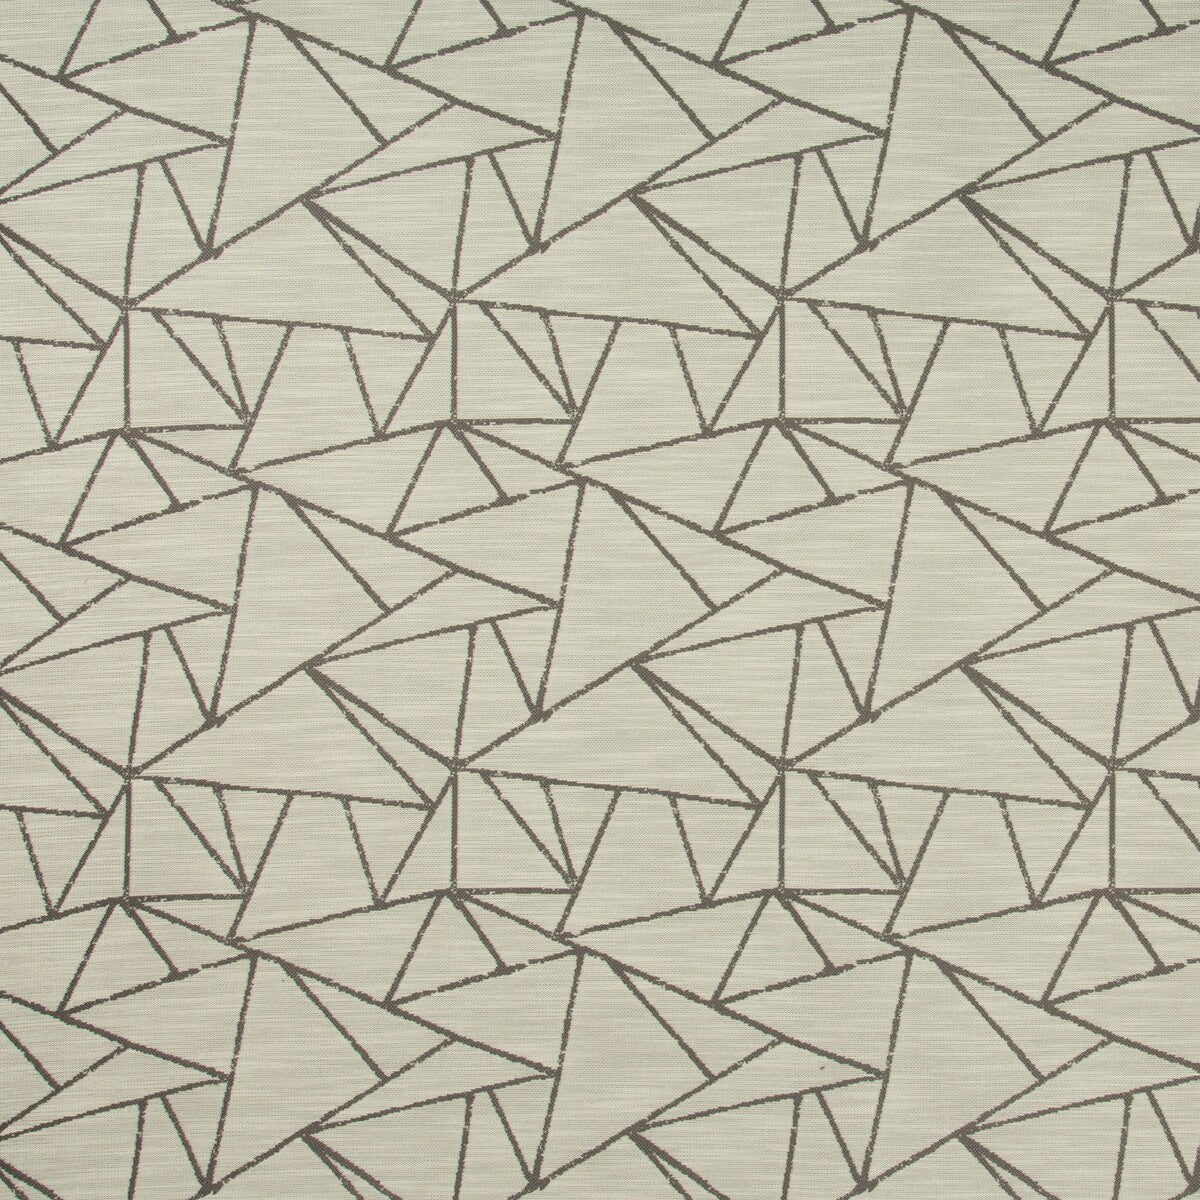 Kravet Contract fabric in 35019-21 color - pattern 35019.21.0 - by Kravet Contract in the Incase Crypton Gis collection